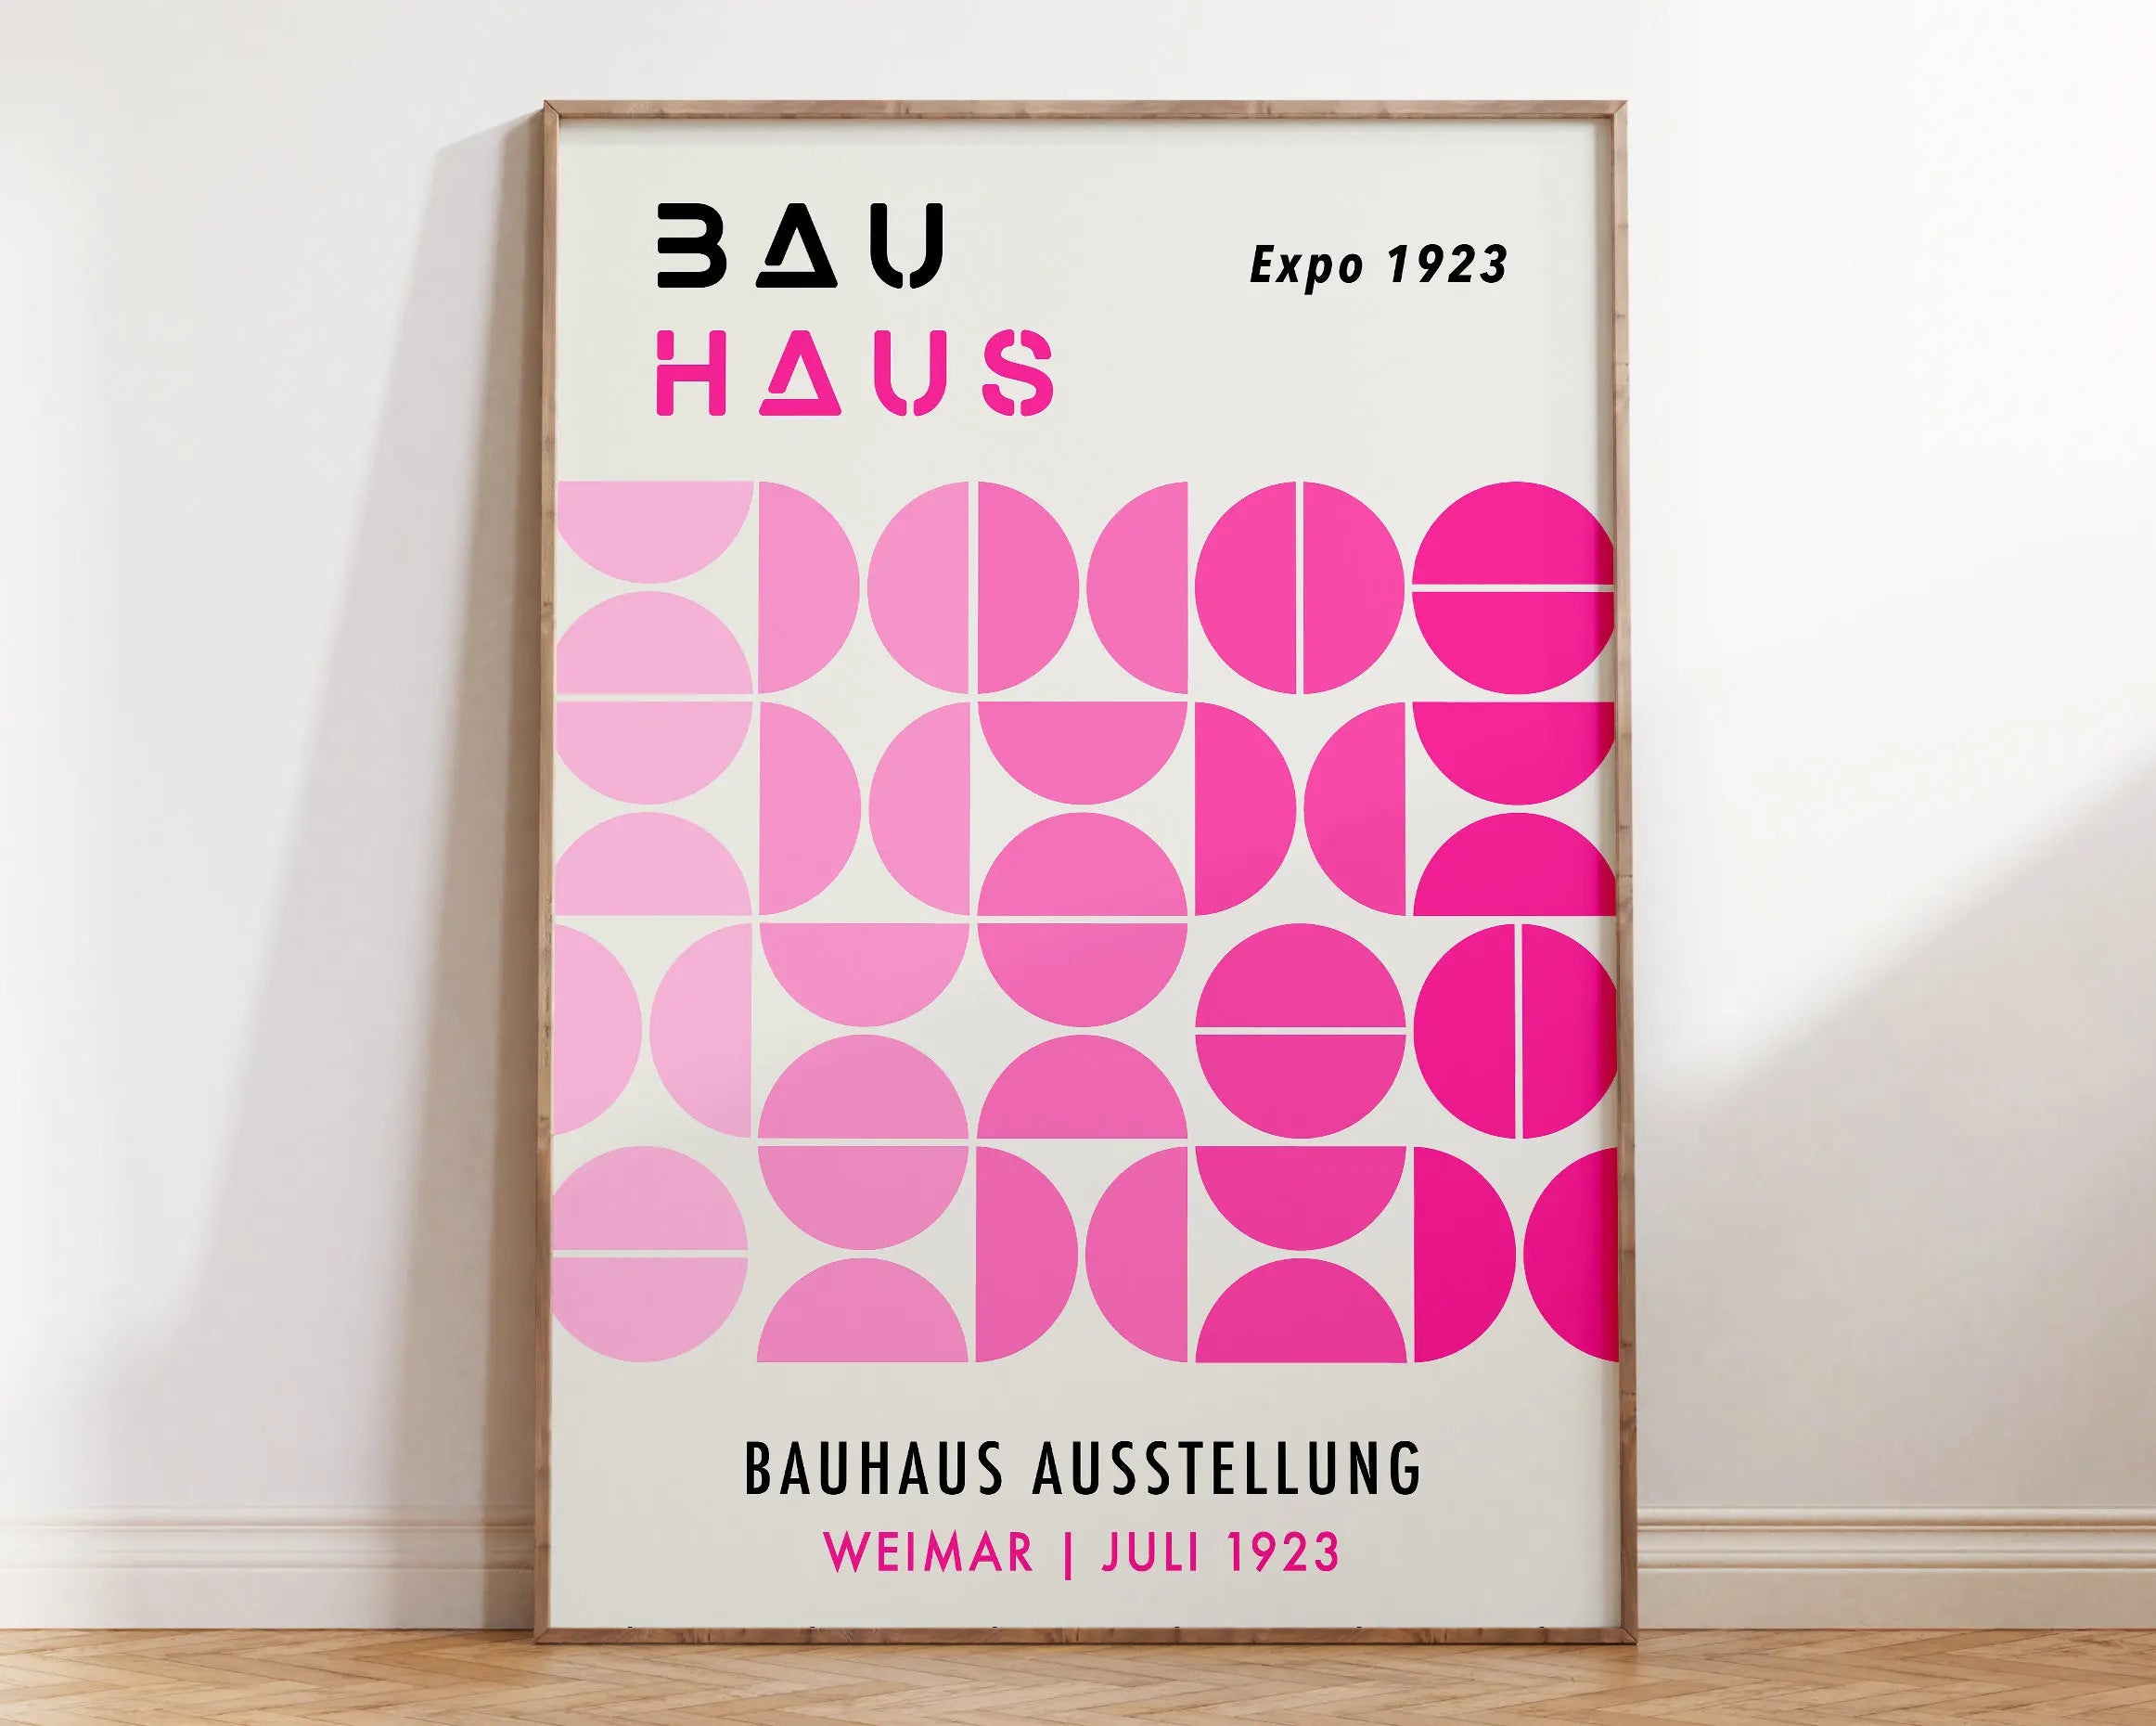 Coloful Vintage Retro Geometric Abstract Bauhaus Expo Art Gallery Poster Wall Art Fine Art Canvas Prints Pictures For Living Room Home Office Decor